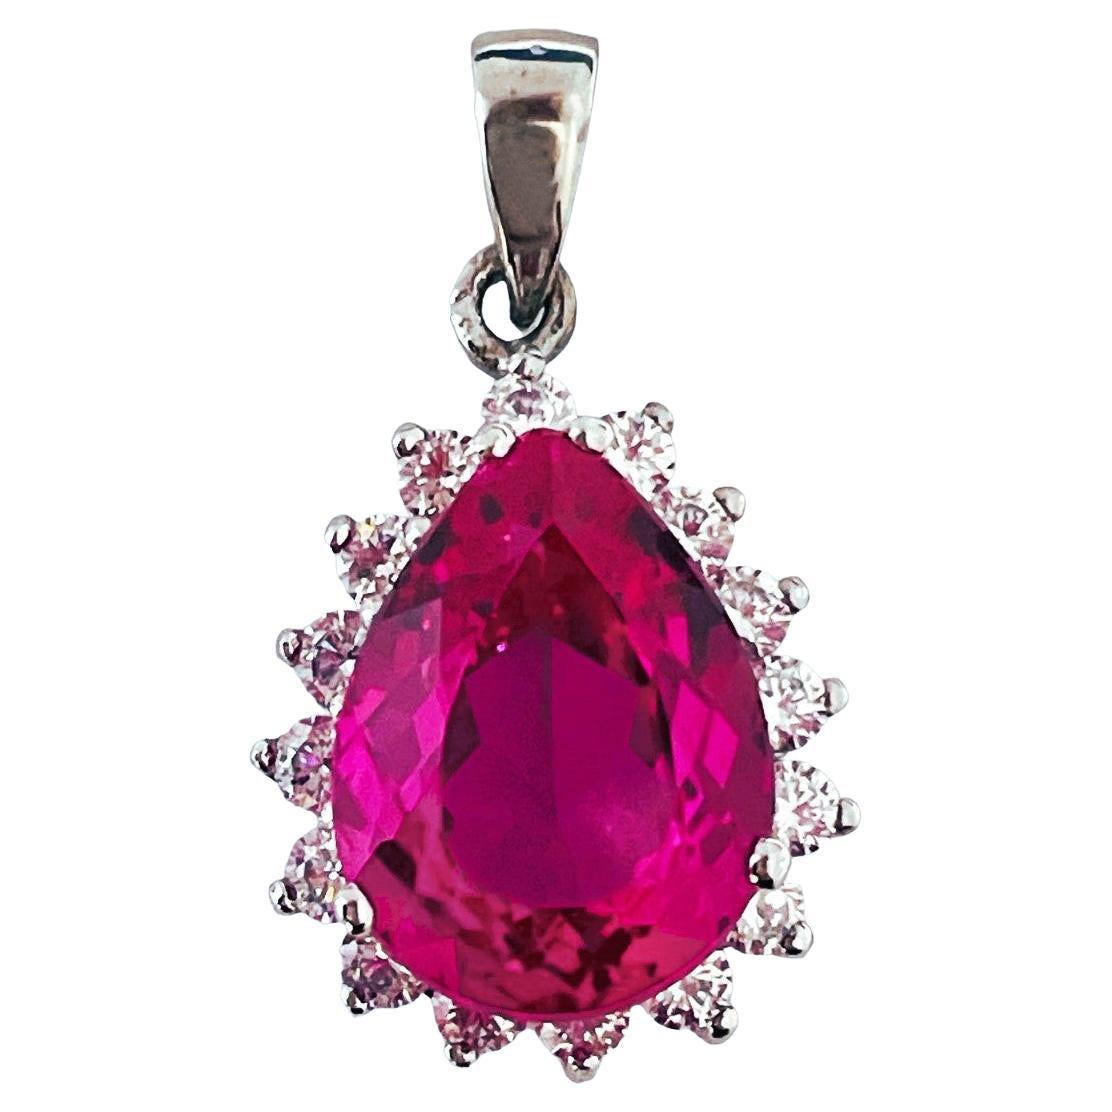 New African 8.7 Carat Raspberry Topaz and White Sapphire Sterling Pendant For Sale